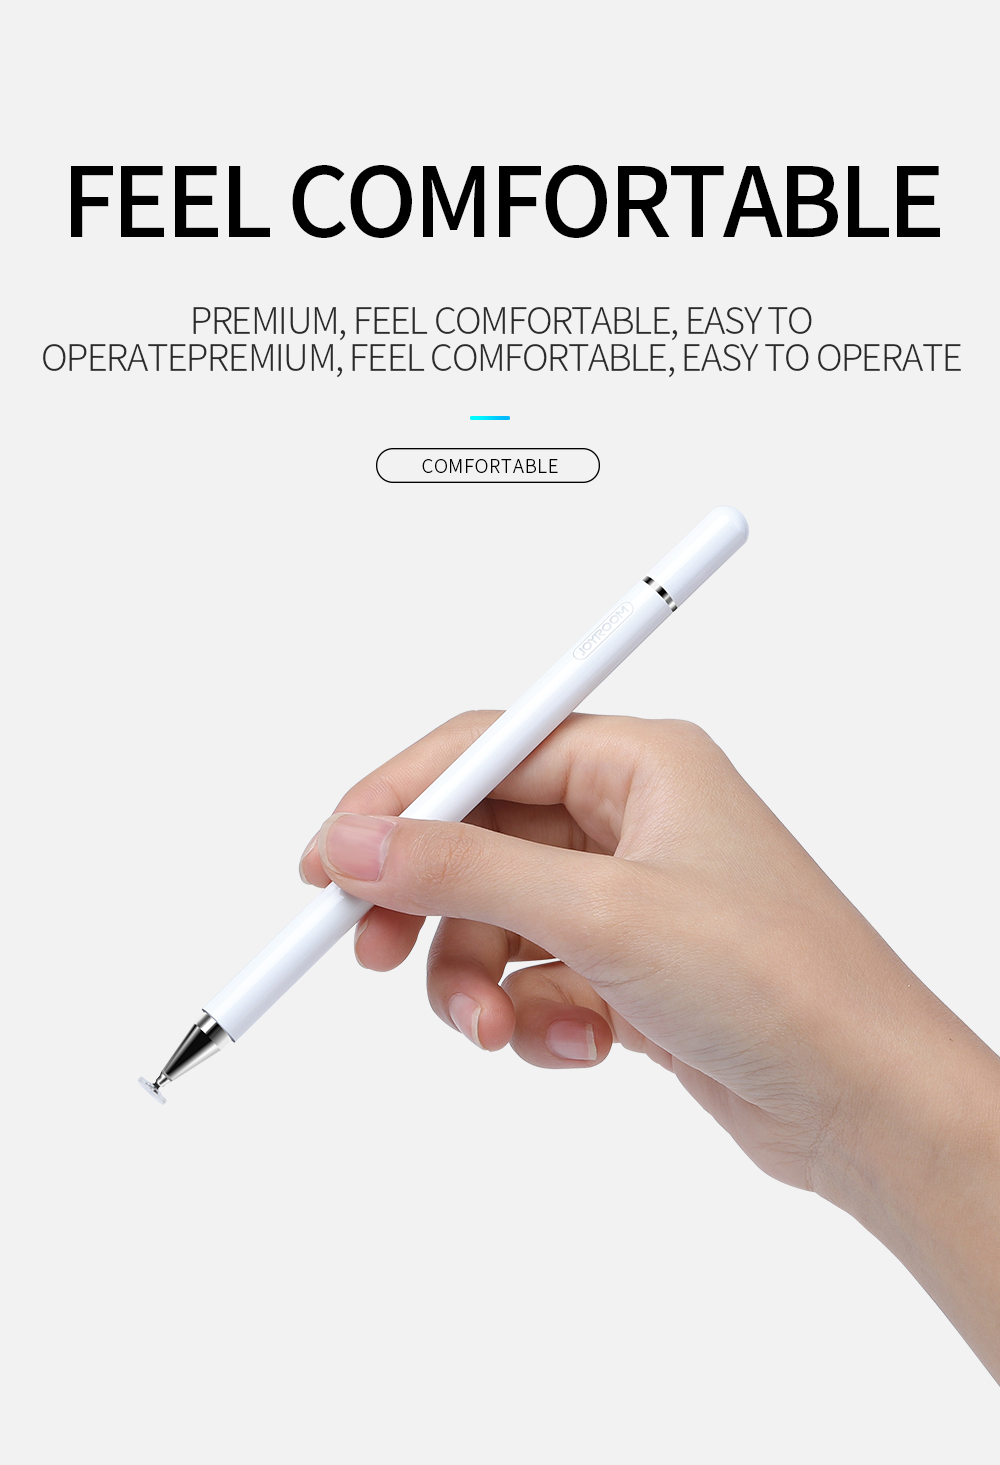 Joyroom-JR-BP560-Passive-Capacitive-Touch-Screen-Stylus-Pen-For-iOS-Android-Windows-Smart-Phone-Tabl-1591275-7